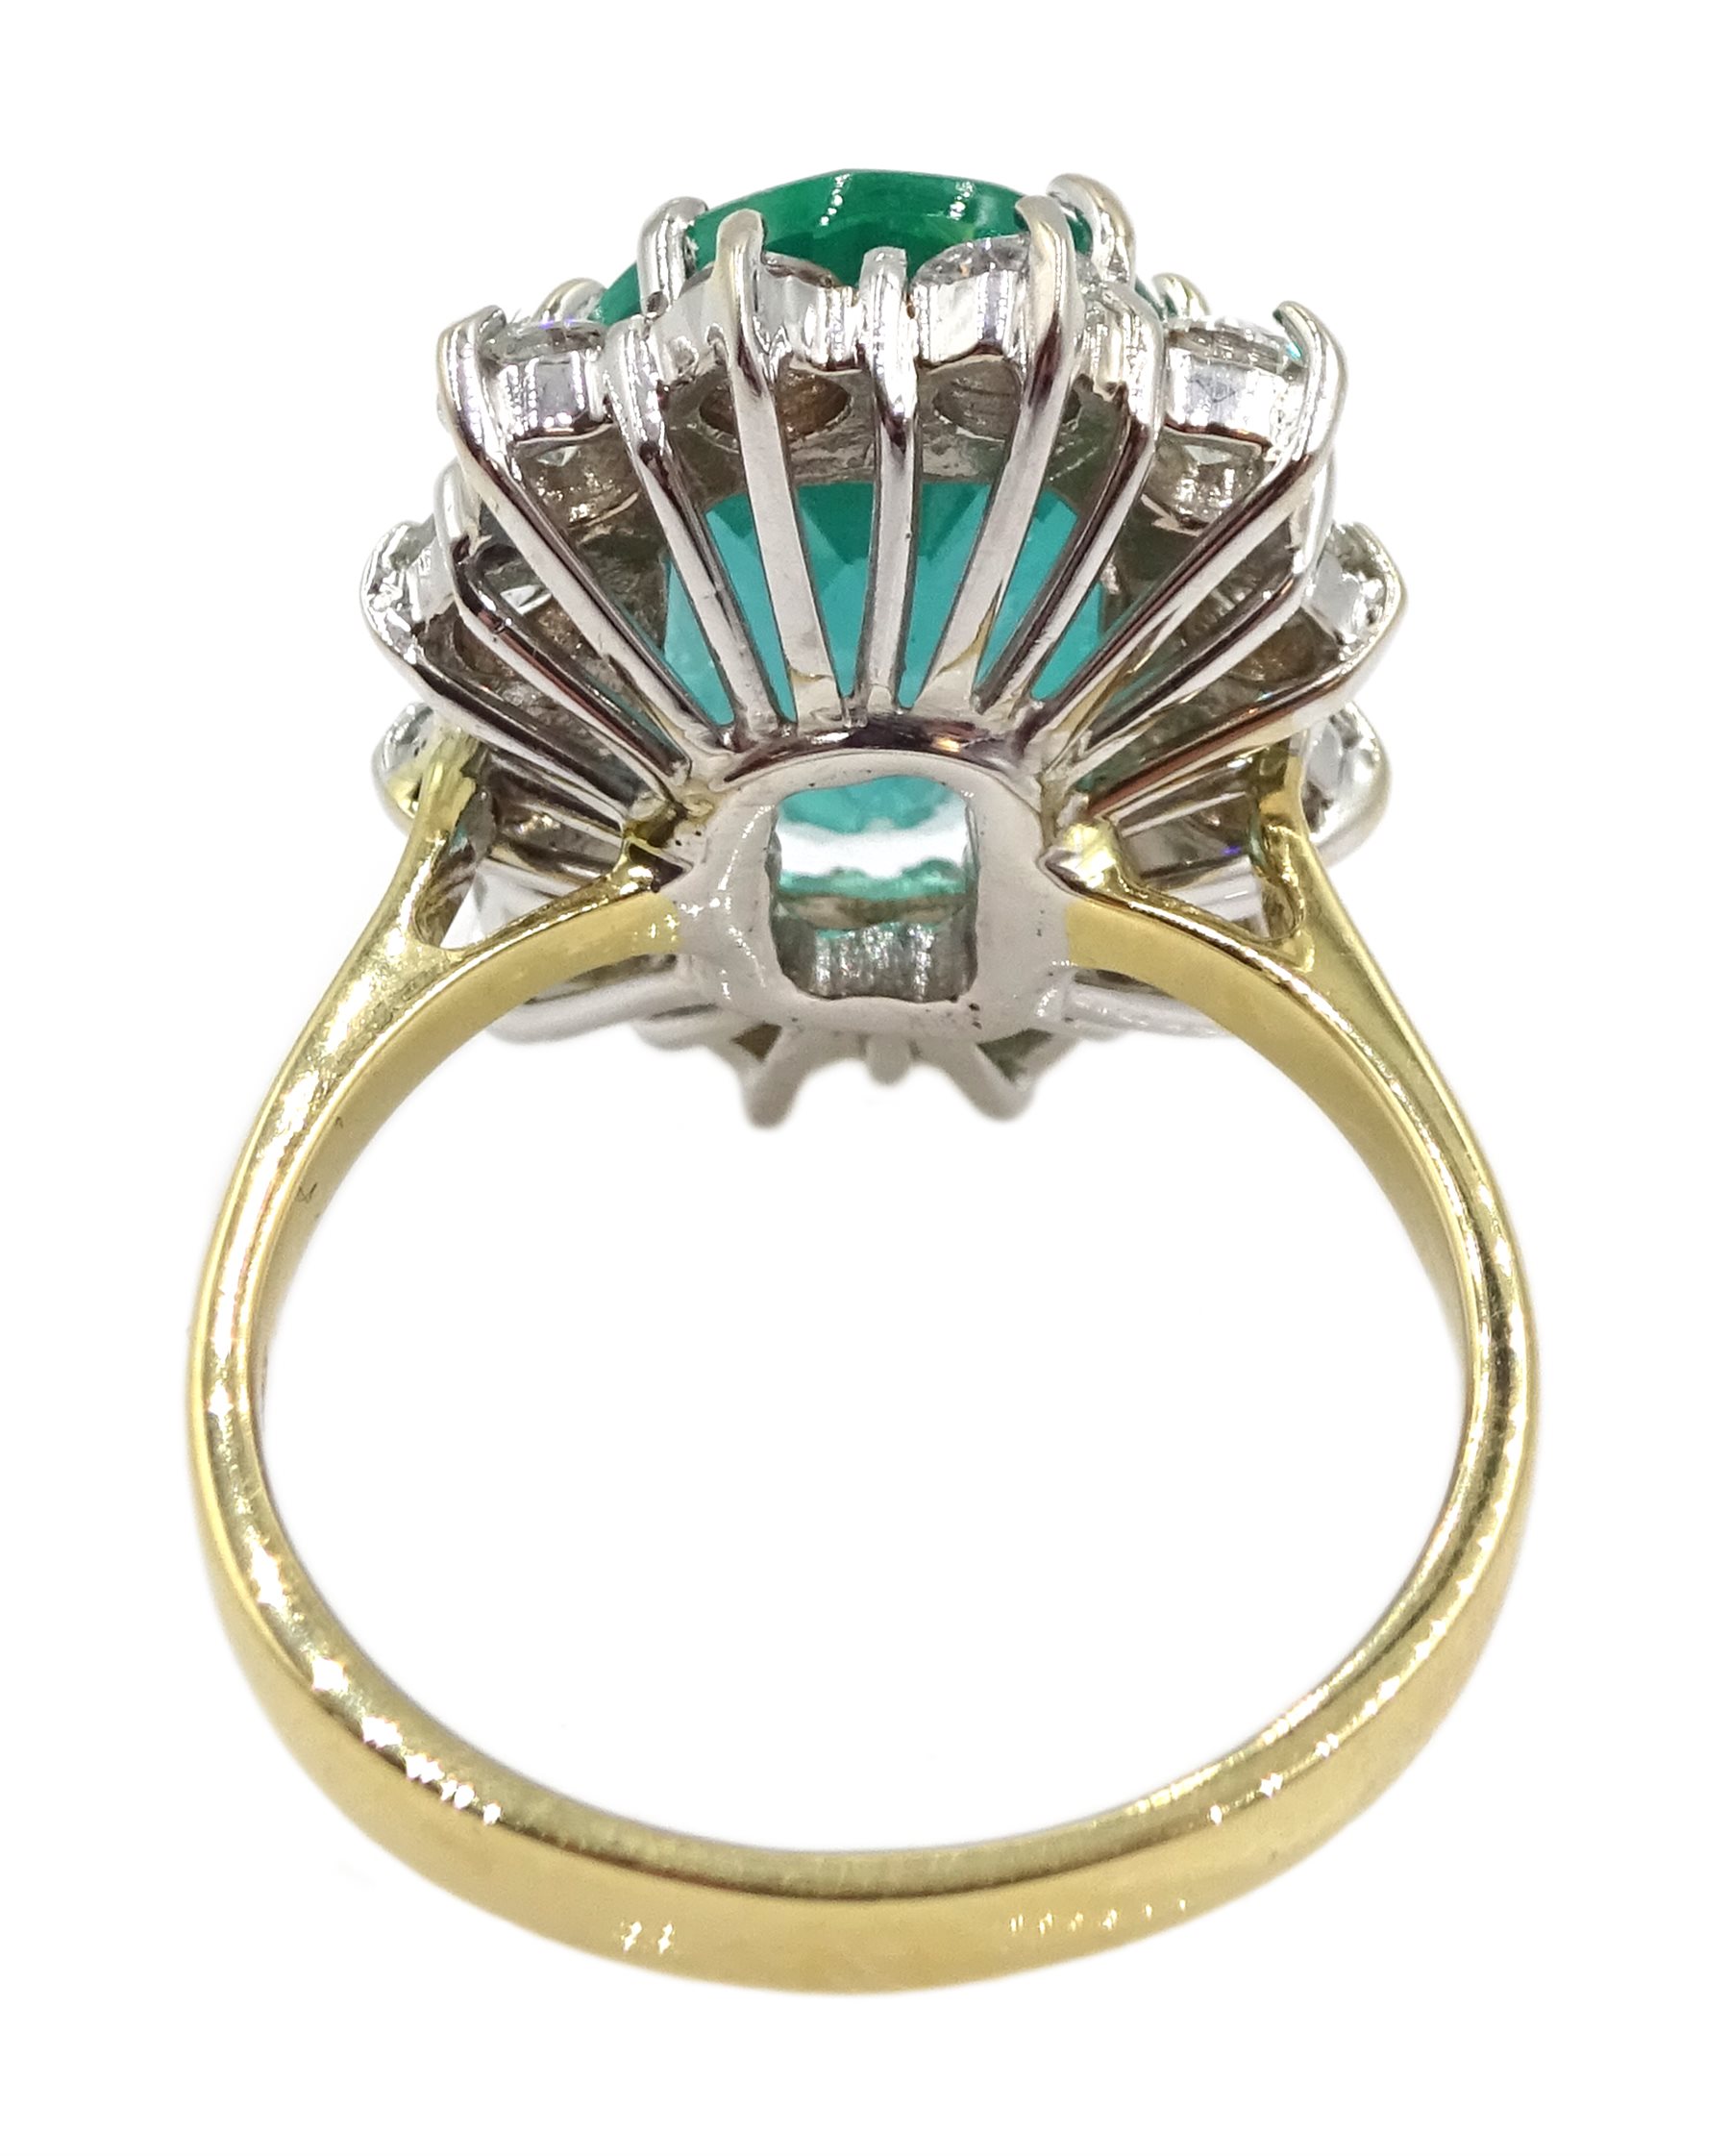 18ct gold oval Zambian emerald and round brilliant cut diamond cluster ring - Image 6 of 16